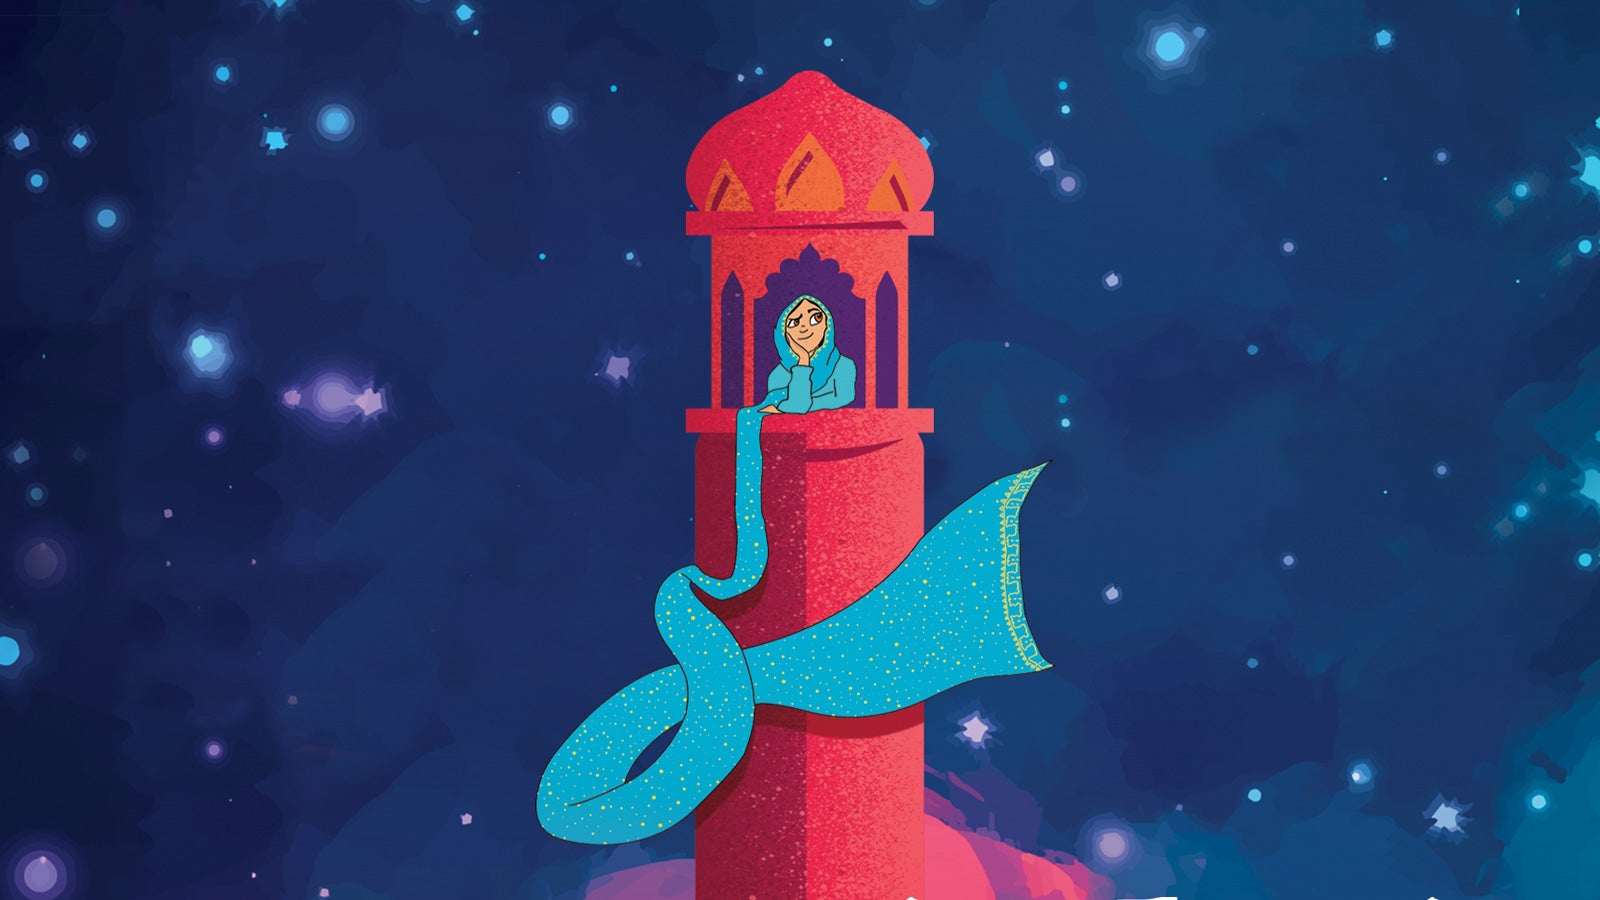 An illustration of Rumaysa staring out from a tower with her hijab flowing from the window, against a starry sky